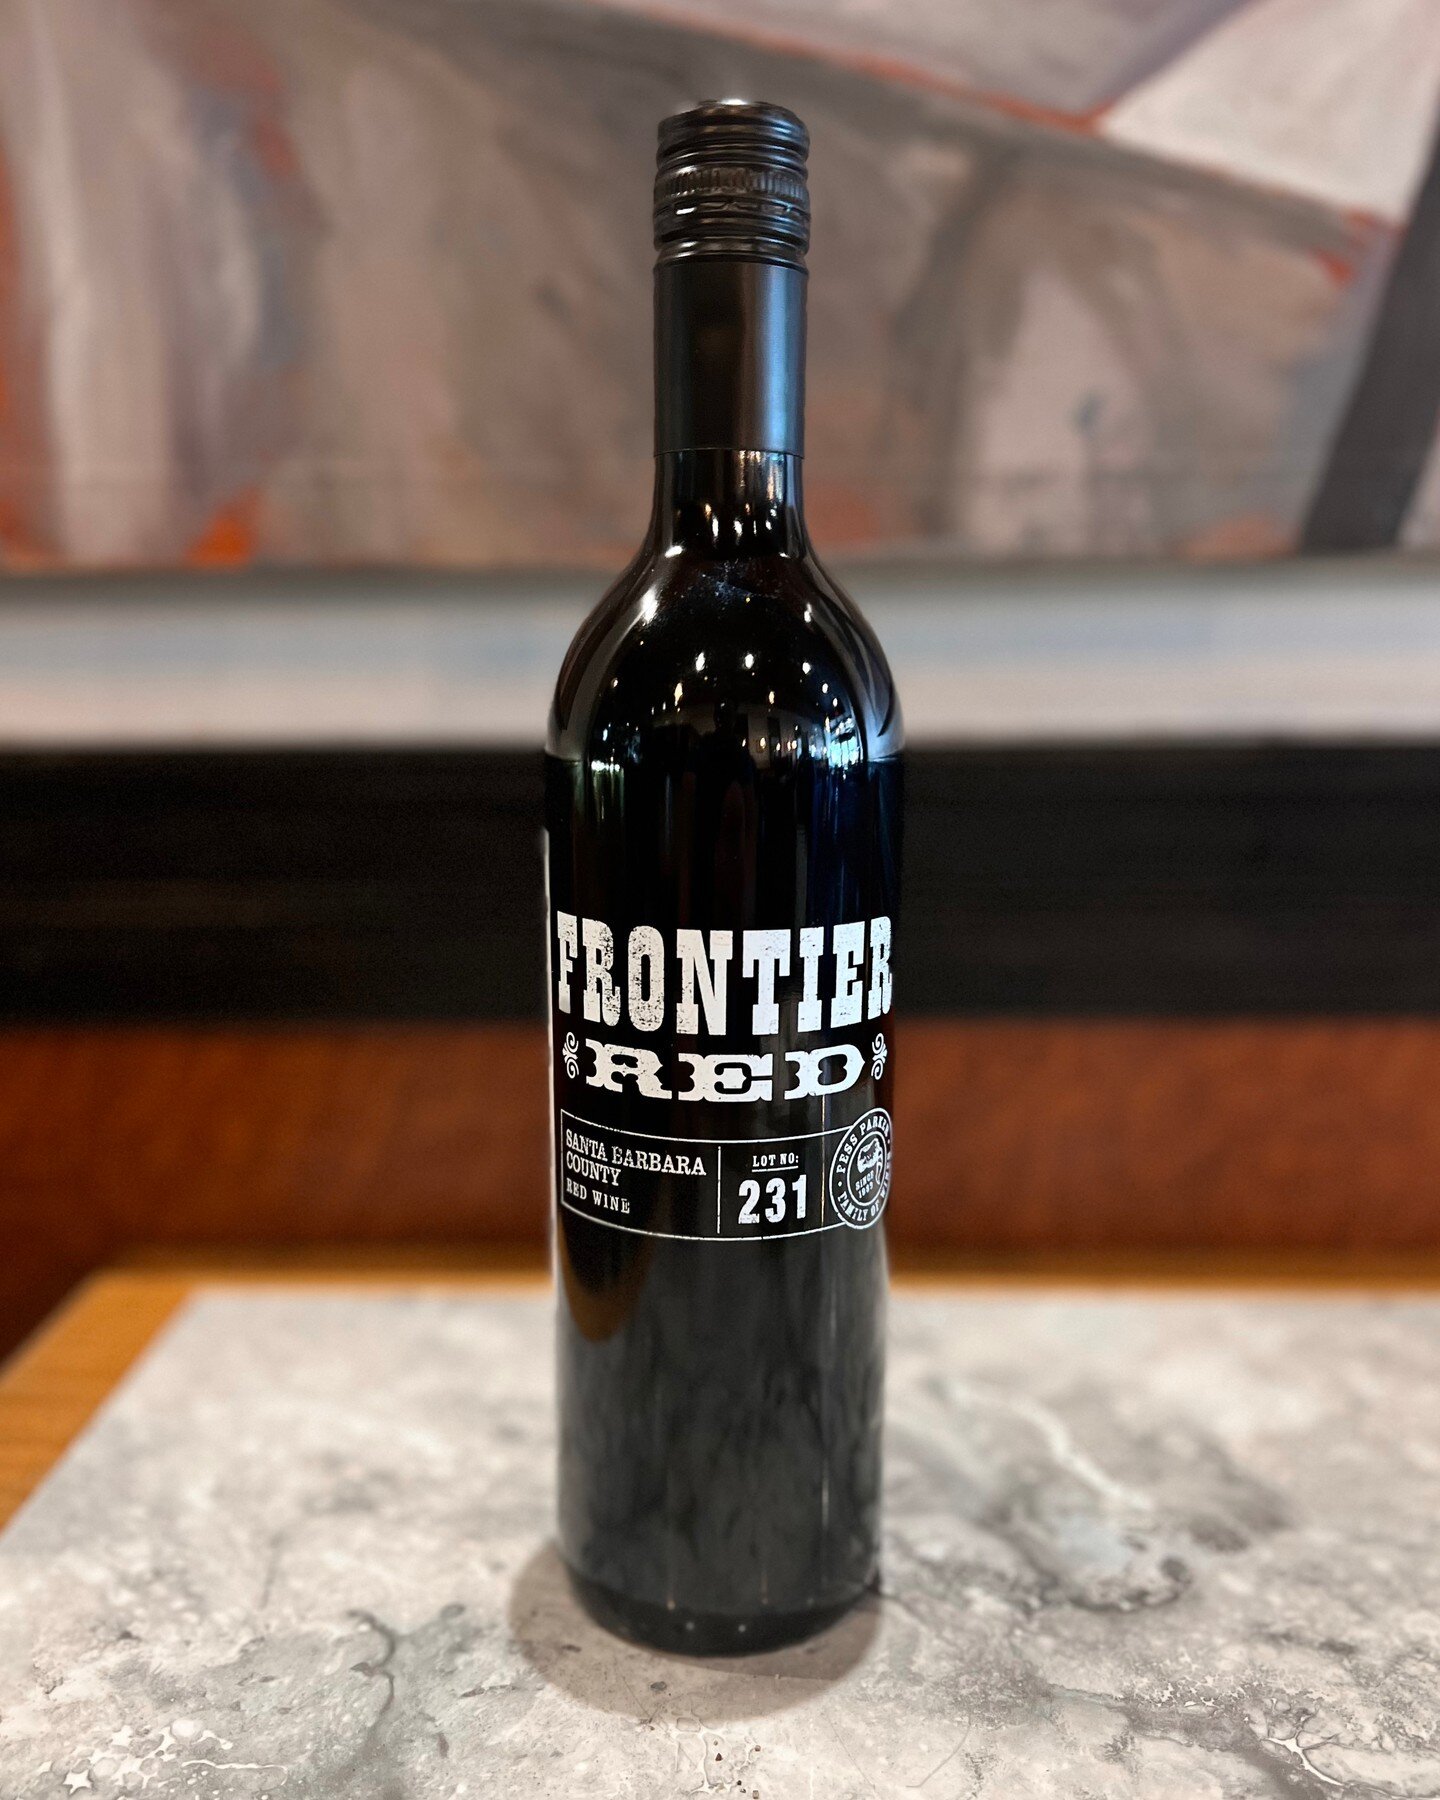 This week's Wine Down Summer featured wine is Frontier Red 🍷 Take $5 off a bottle all week long!
This red from Santa Barbara has lush red and black fruit flavors with enticing spice, vanilla, and oak notes.